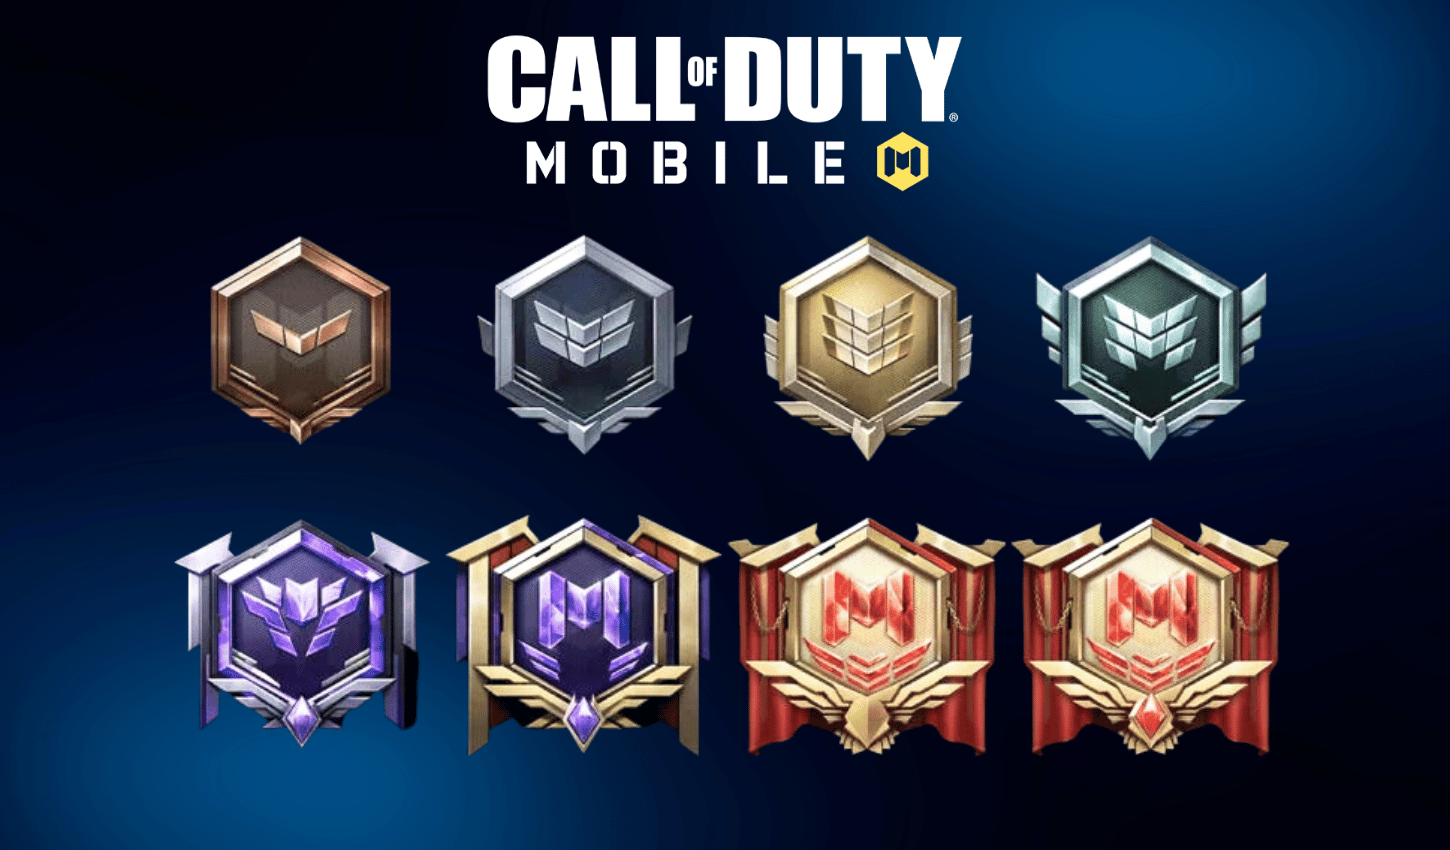 Call of Duty: Mobile 